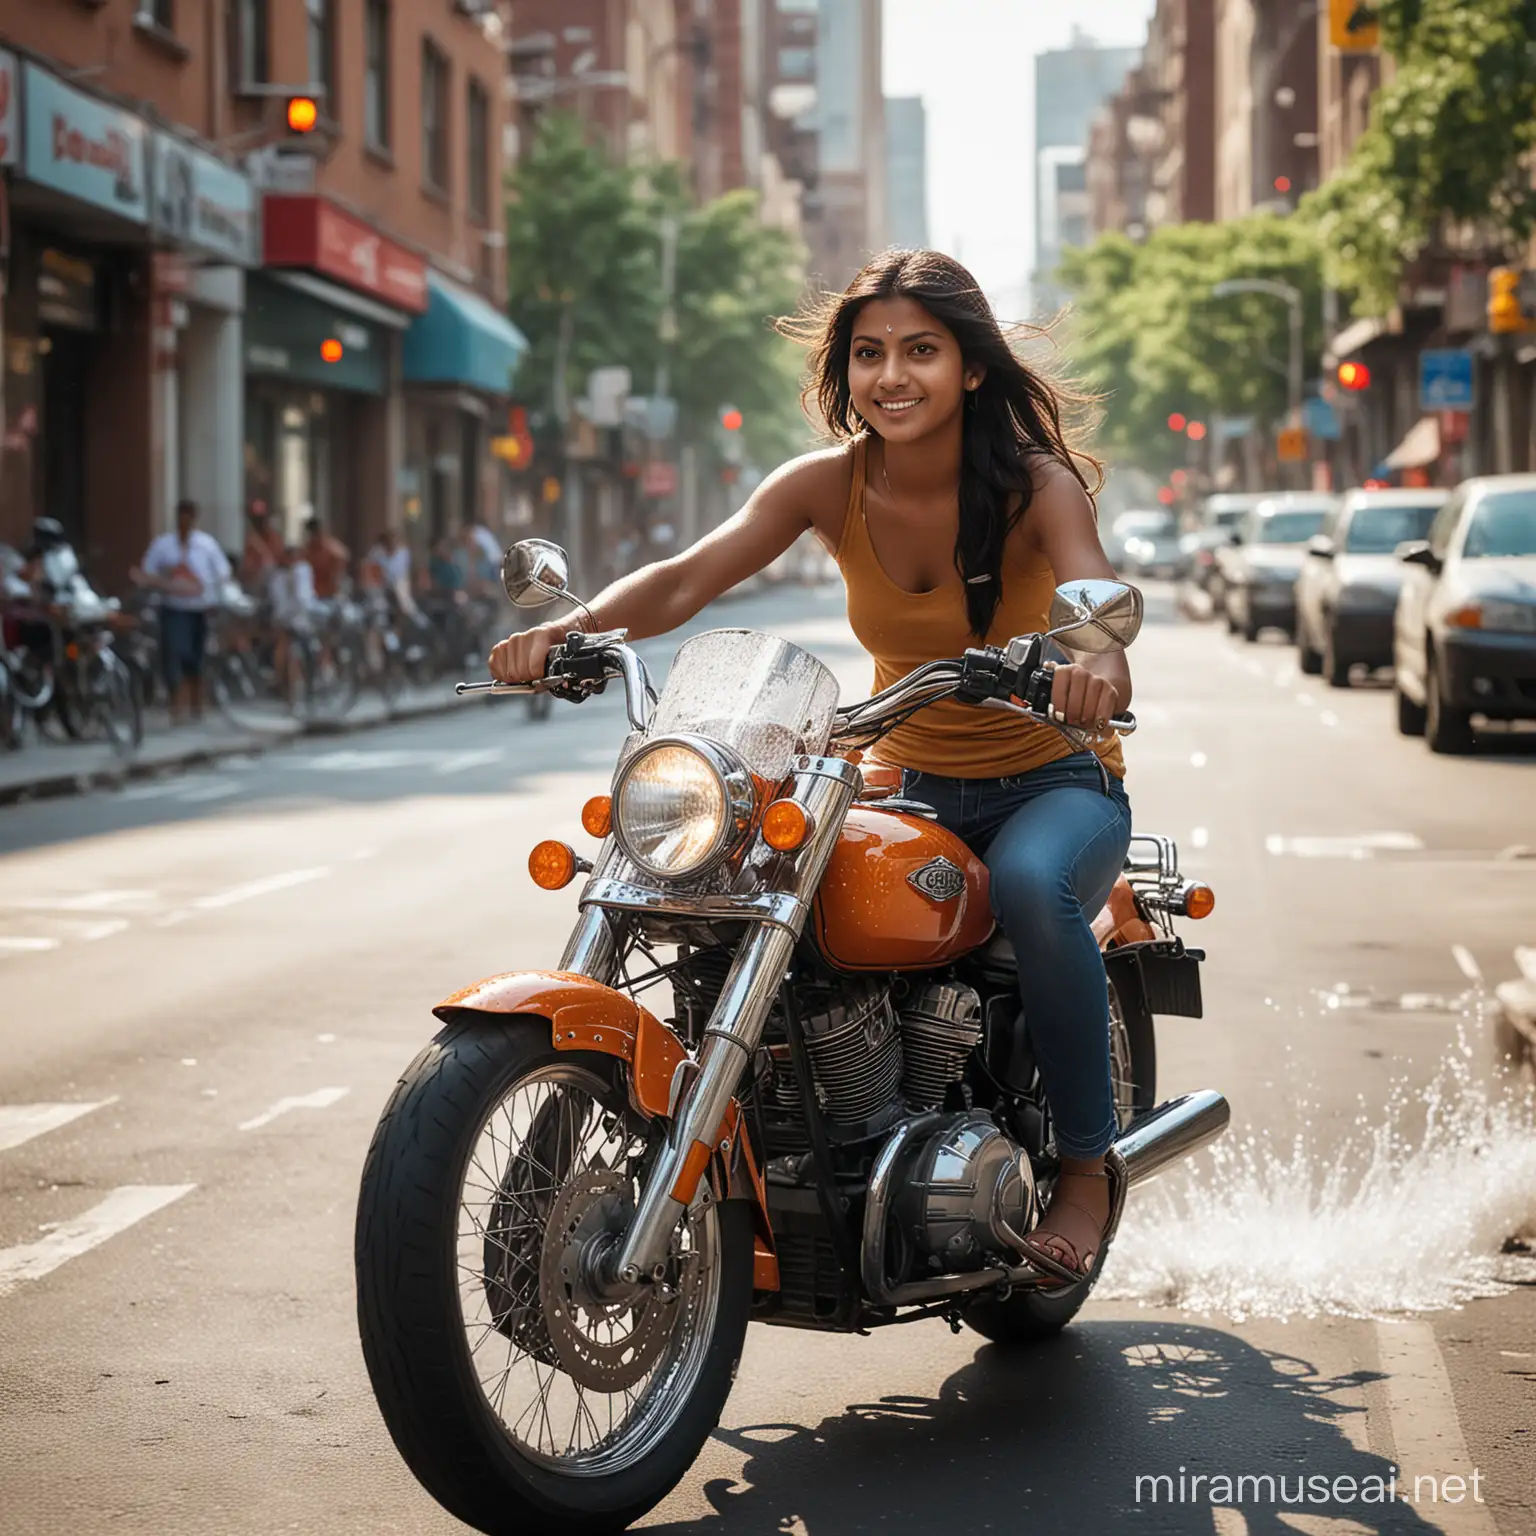 Confident Indian Girl Riding IceCovered Motorcycle in Hot Cityscape